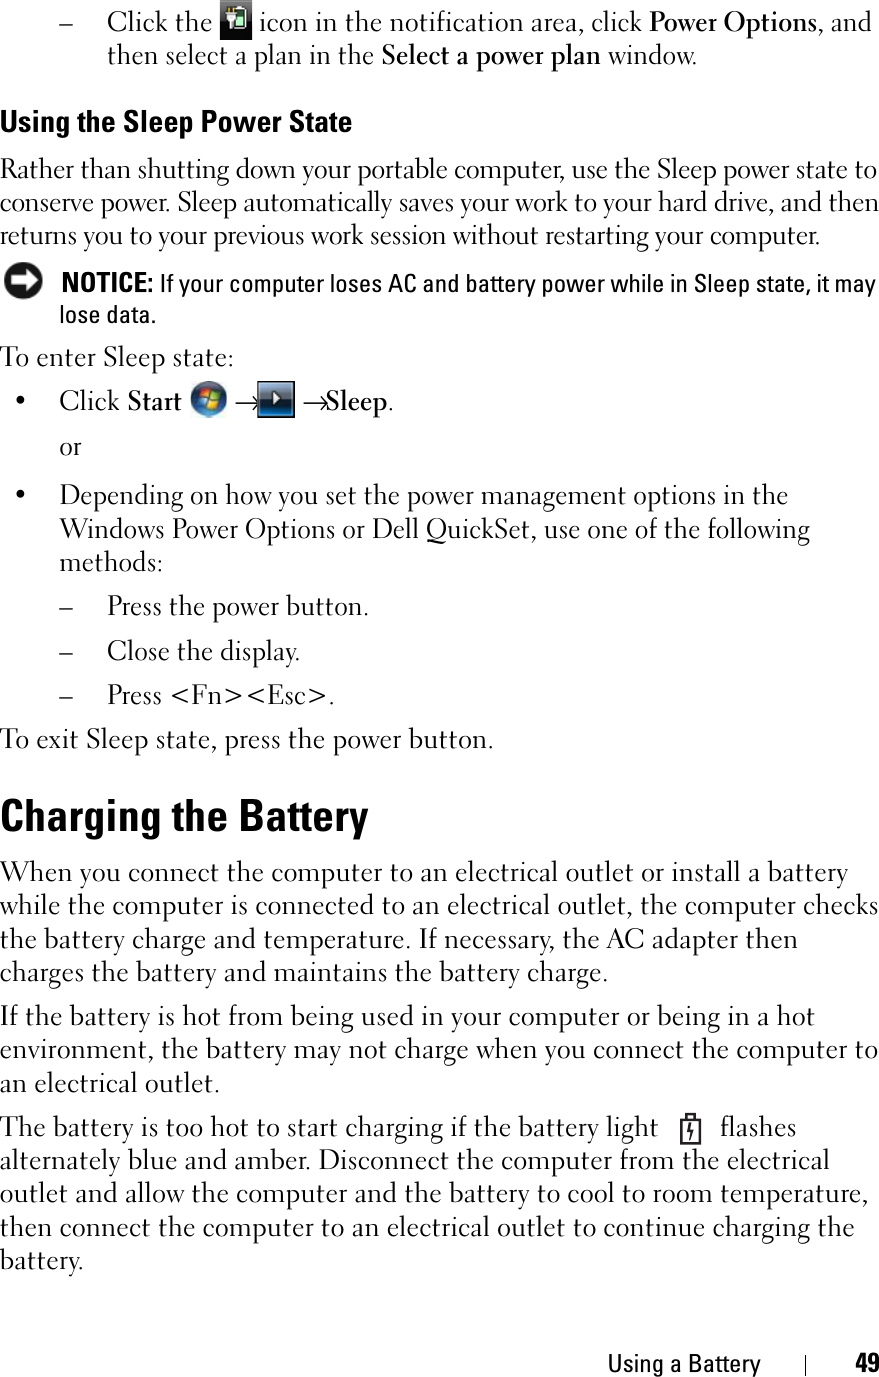 Using a Battery 49–Click the   icon in the notification area, click Power Options, and then select a plan in the Select a power plan window.Using the Sleep Power StateRather than shutting down your portable computer, use the Sleep power state to conserve power. Sleep automatically saves your work to your hard drive, and then returns you to your previous work session without restarting your computer. NOTICE: If your computer loses AC and battery power while in Sleep state, it may lose data.To enter Sleep state:•ClickStart→→Sleep.or• Depending on how you set the power management options in the Windows Power Options or Dell QuickSet, use one of the following methods:– Press the power button.– Close the display.– Press &lt;Fn&gt;&lt;Esc&gt;.To exit Sleep state, press the power button.Charging the BatteryWhen you connect the computer to an electrical outlet or install a battery while the computer is connected to an electrical outlet, the computer checks the battery charge and temperature. If necessary, the AC adapter then charges the battery and maintains the battery charge.If the battery is hot from being used in your computer or being in a hot environment, the battery may not charge when you connect the computer to an electrical outlet.The battery is too hot to start charging if the battery light   flashes alternately blue and amber. Disconnect the computer from the electrical outlet and allow the computer and the battery to cool to room temperature, then connect the computer to an electrical outlet to continue charging the battery.